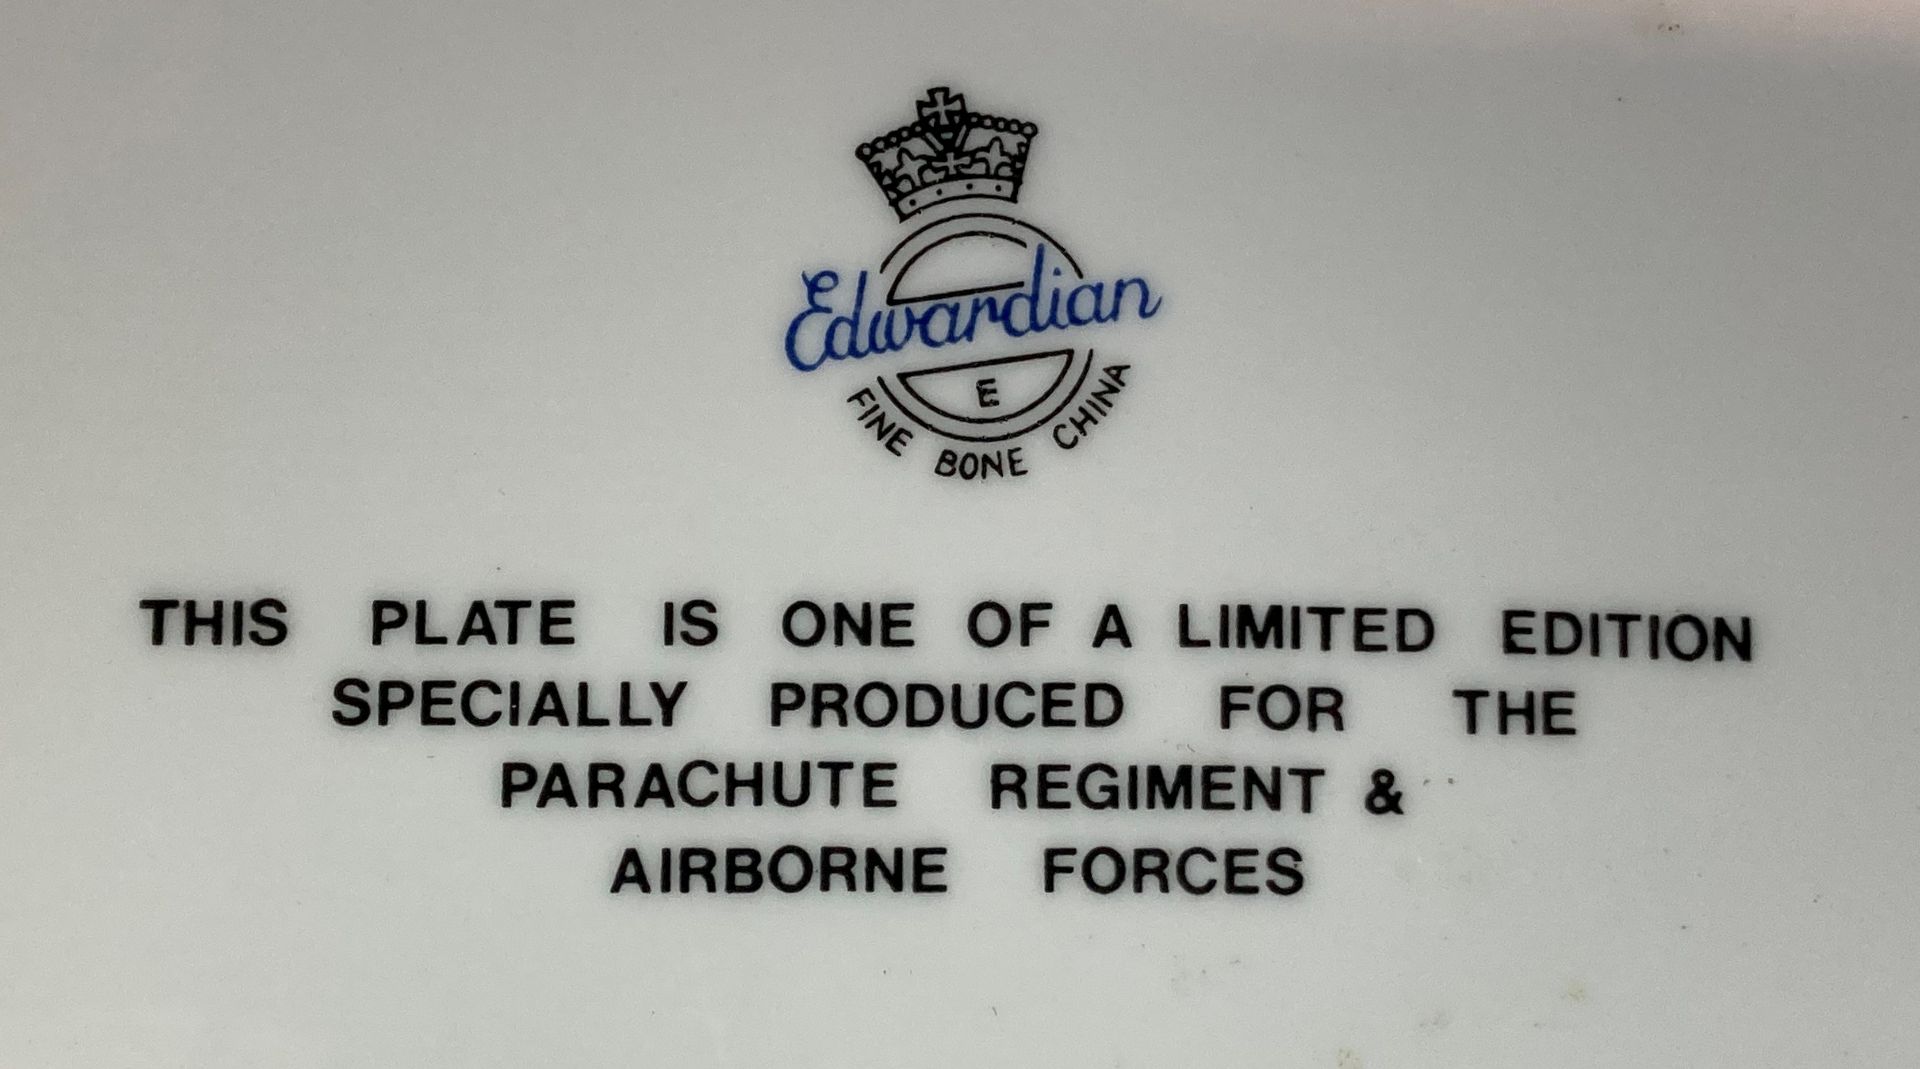 Edwardian fine bone china limited edition plate specially produced for the Parachute Regiment and - Image 3 of 3